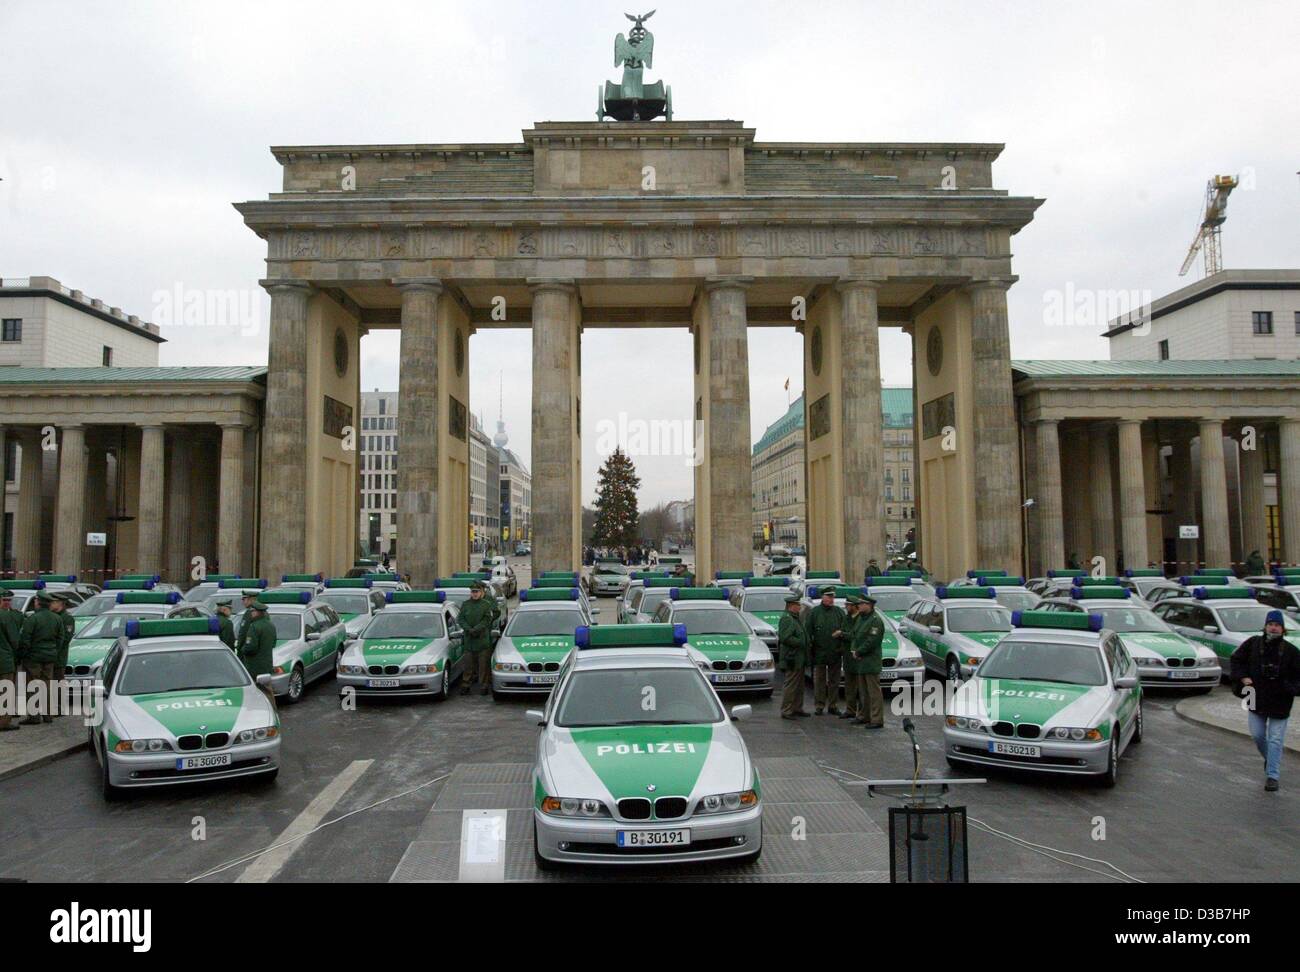 (dpa) - BMWs of Berlin's police stand in front of the Brandenburg Gate in Berlin, 18 December 2002. The 100 new police cars were handed over to Berlin's police before. The BMWs with diesel-engines have been leased for two years and are going to enrich the rolling stock. Whereas the police in other c Stock Photo